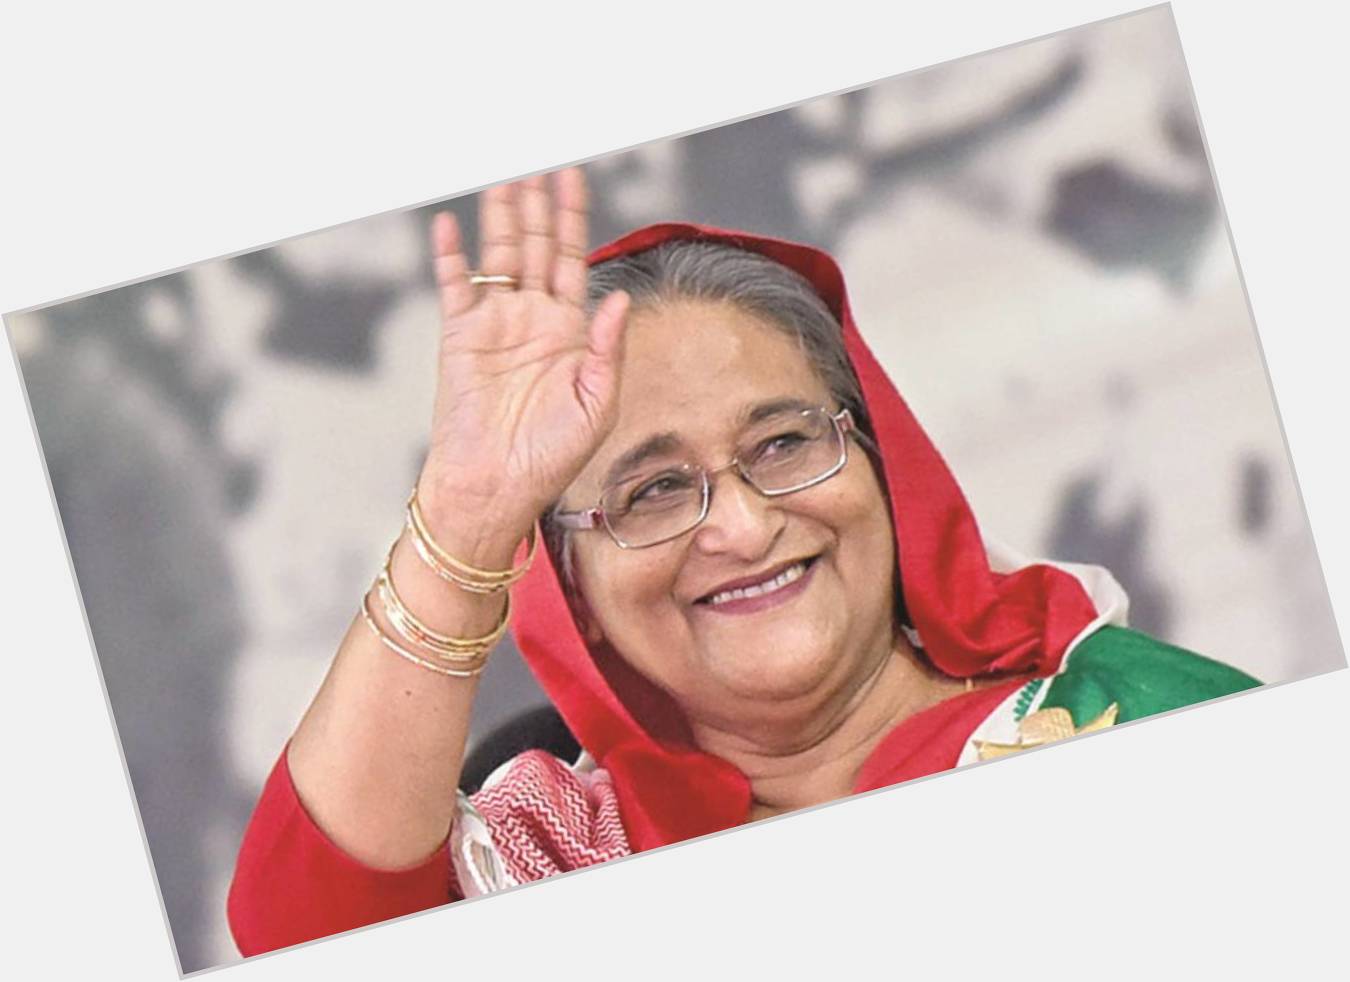 Happy 74th Birthday to the Honourable Prime Minister of People\s Republic of Bangladesh Sheikh Hasina 